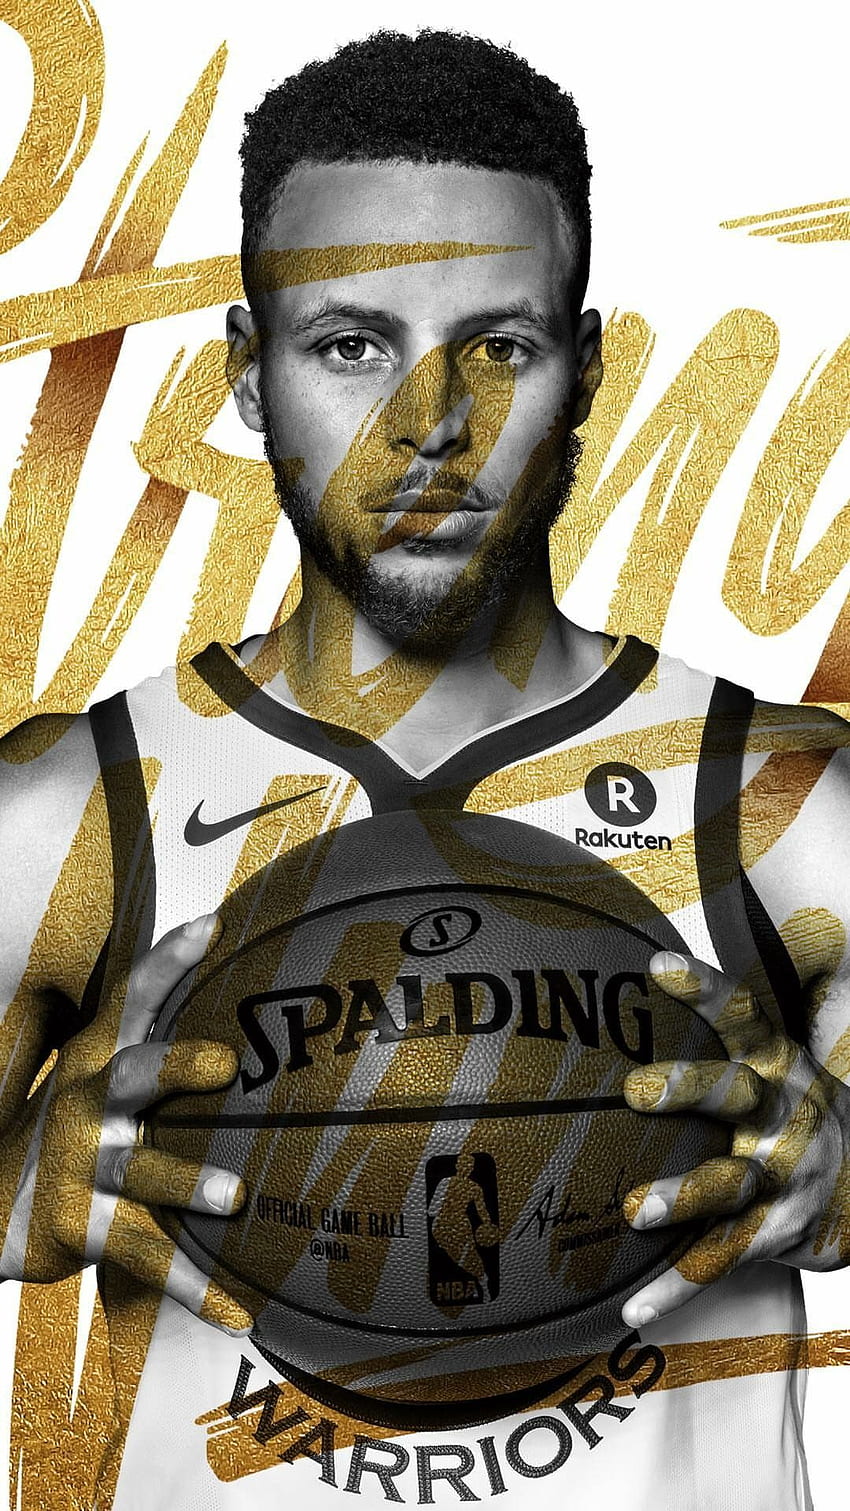 Stephen Curry. BOLA BASKET. Stephen Curry wallpaper ponsel HD